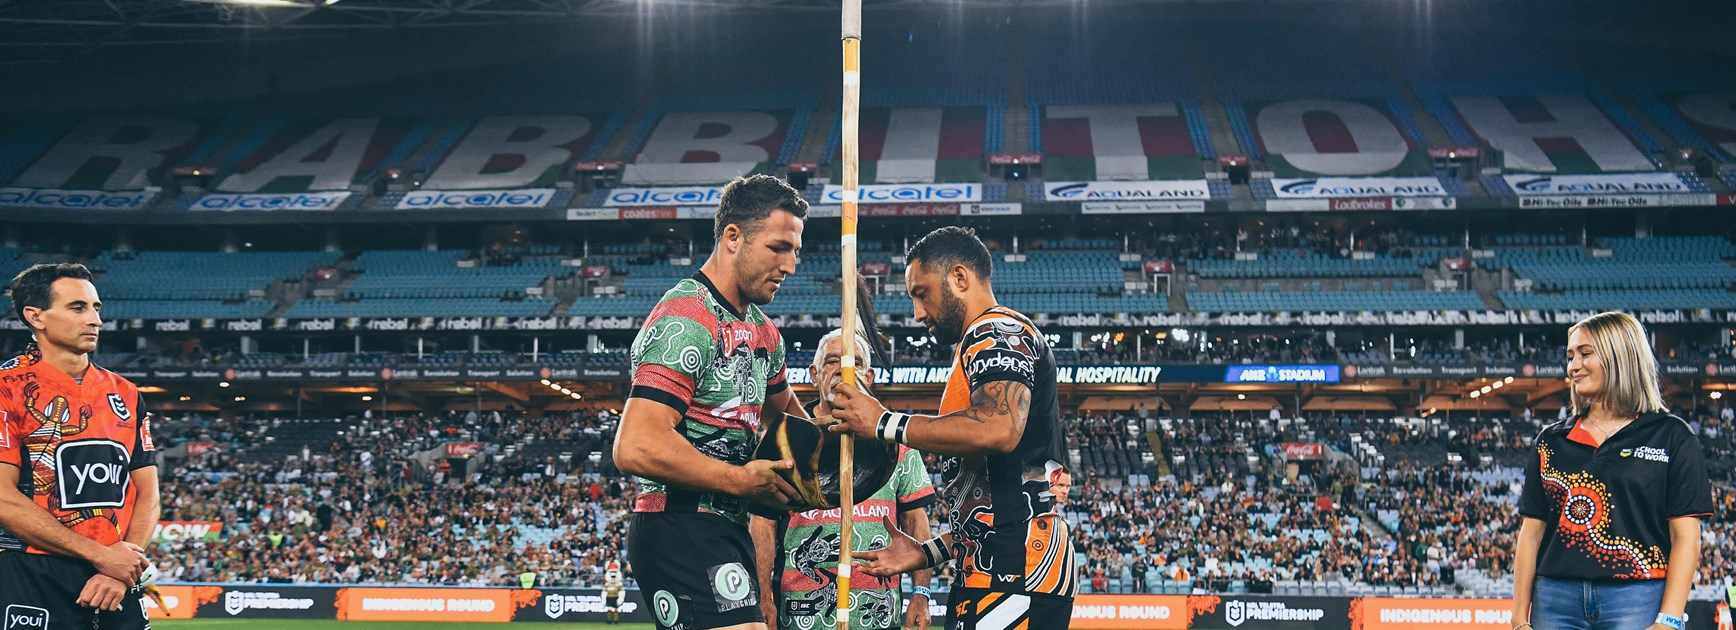 Wests Tigers Results: Round 11